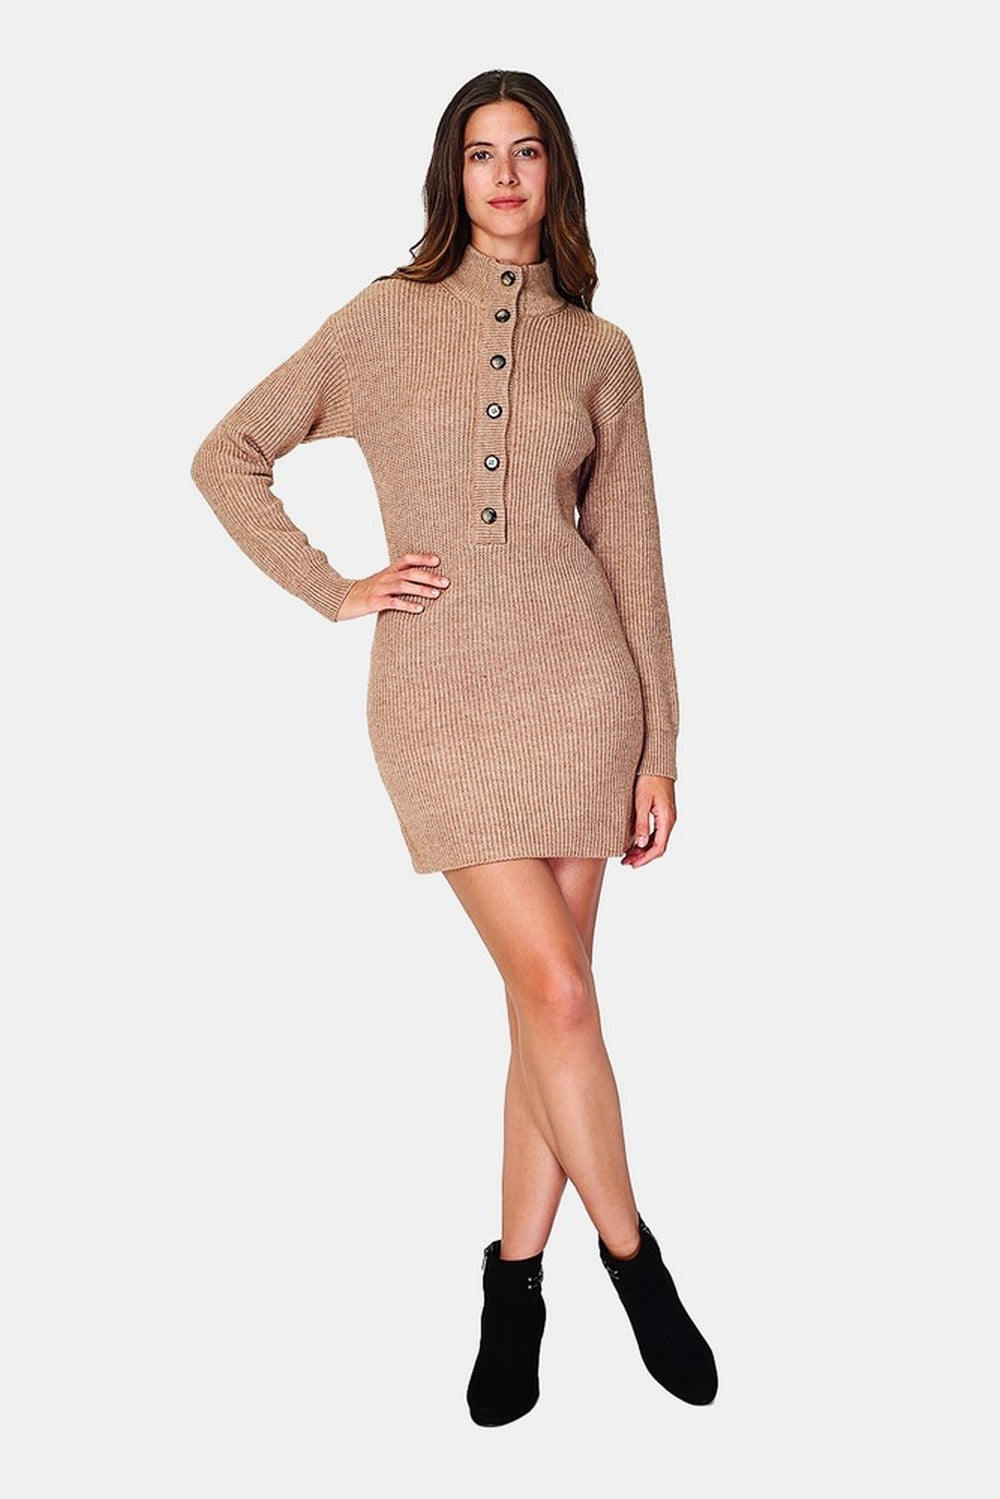 High neck button front knit dress in English rib